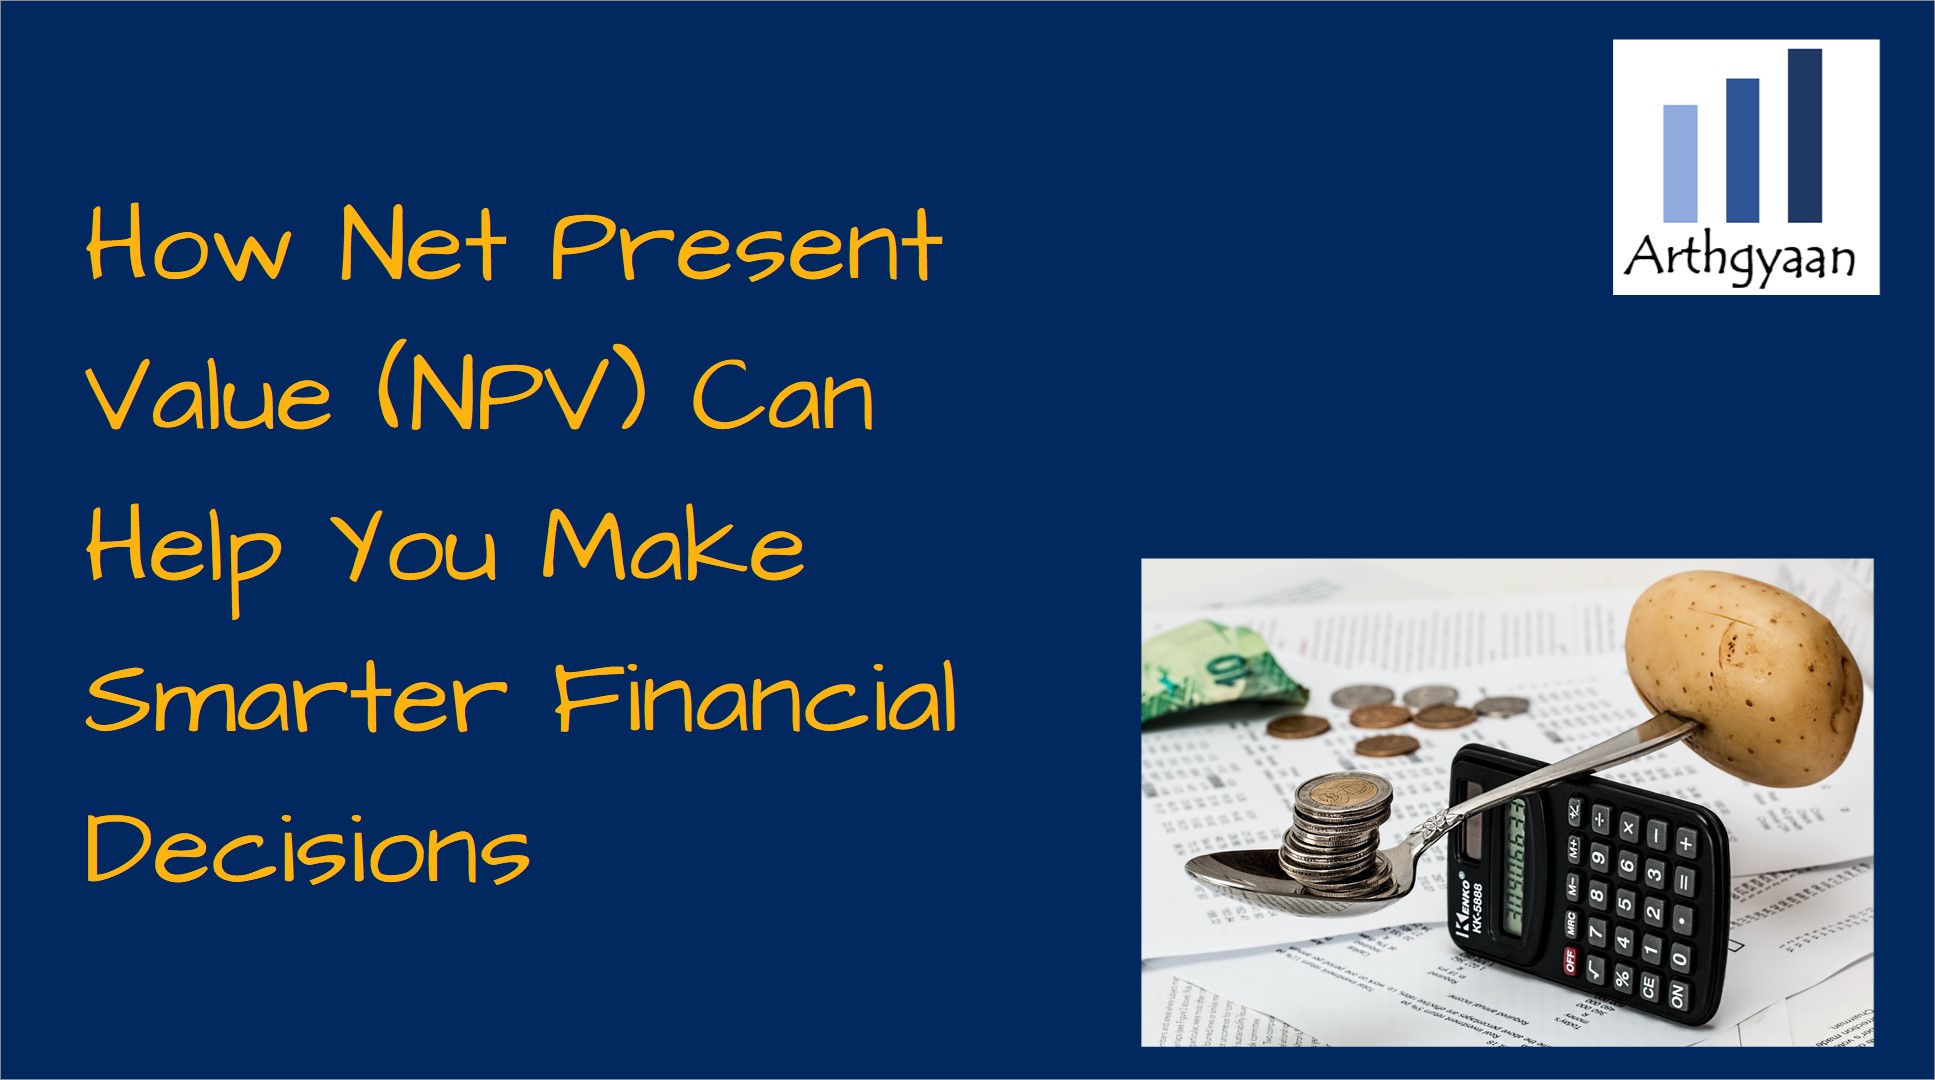 How Net Present Value (NPV) Can Help You Make Smarter Financial Decisions